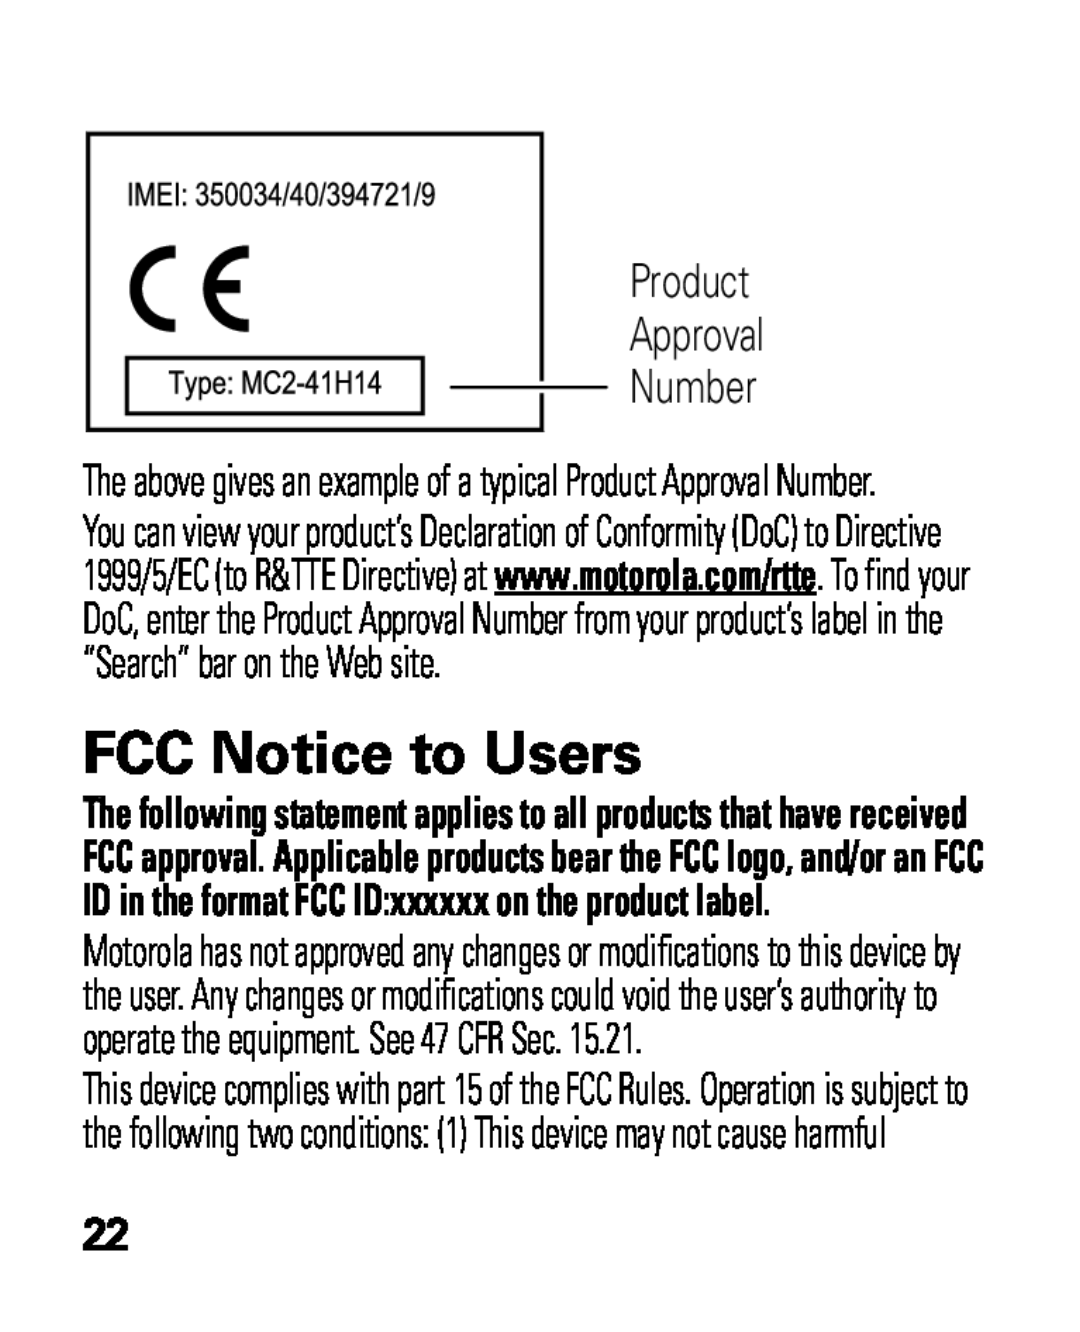 Motorola HK100 quick start FCC Notice to Users, Product Approval Number 